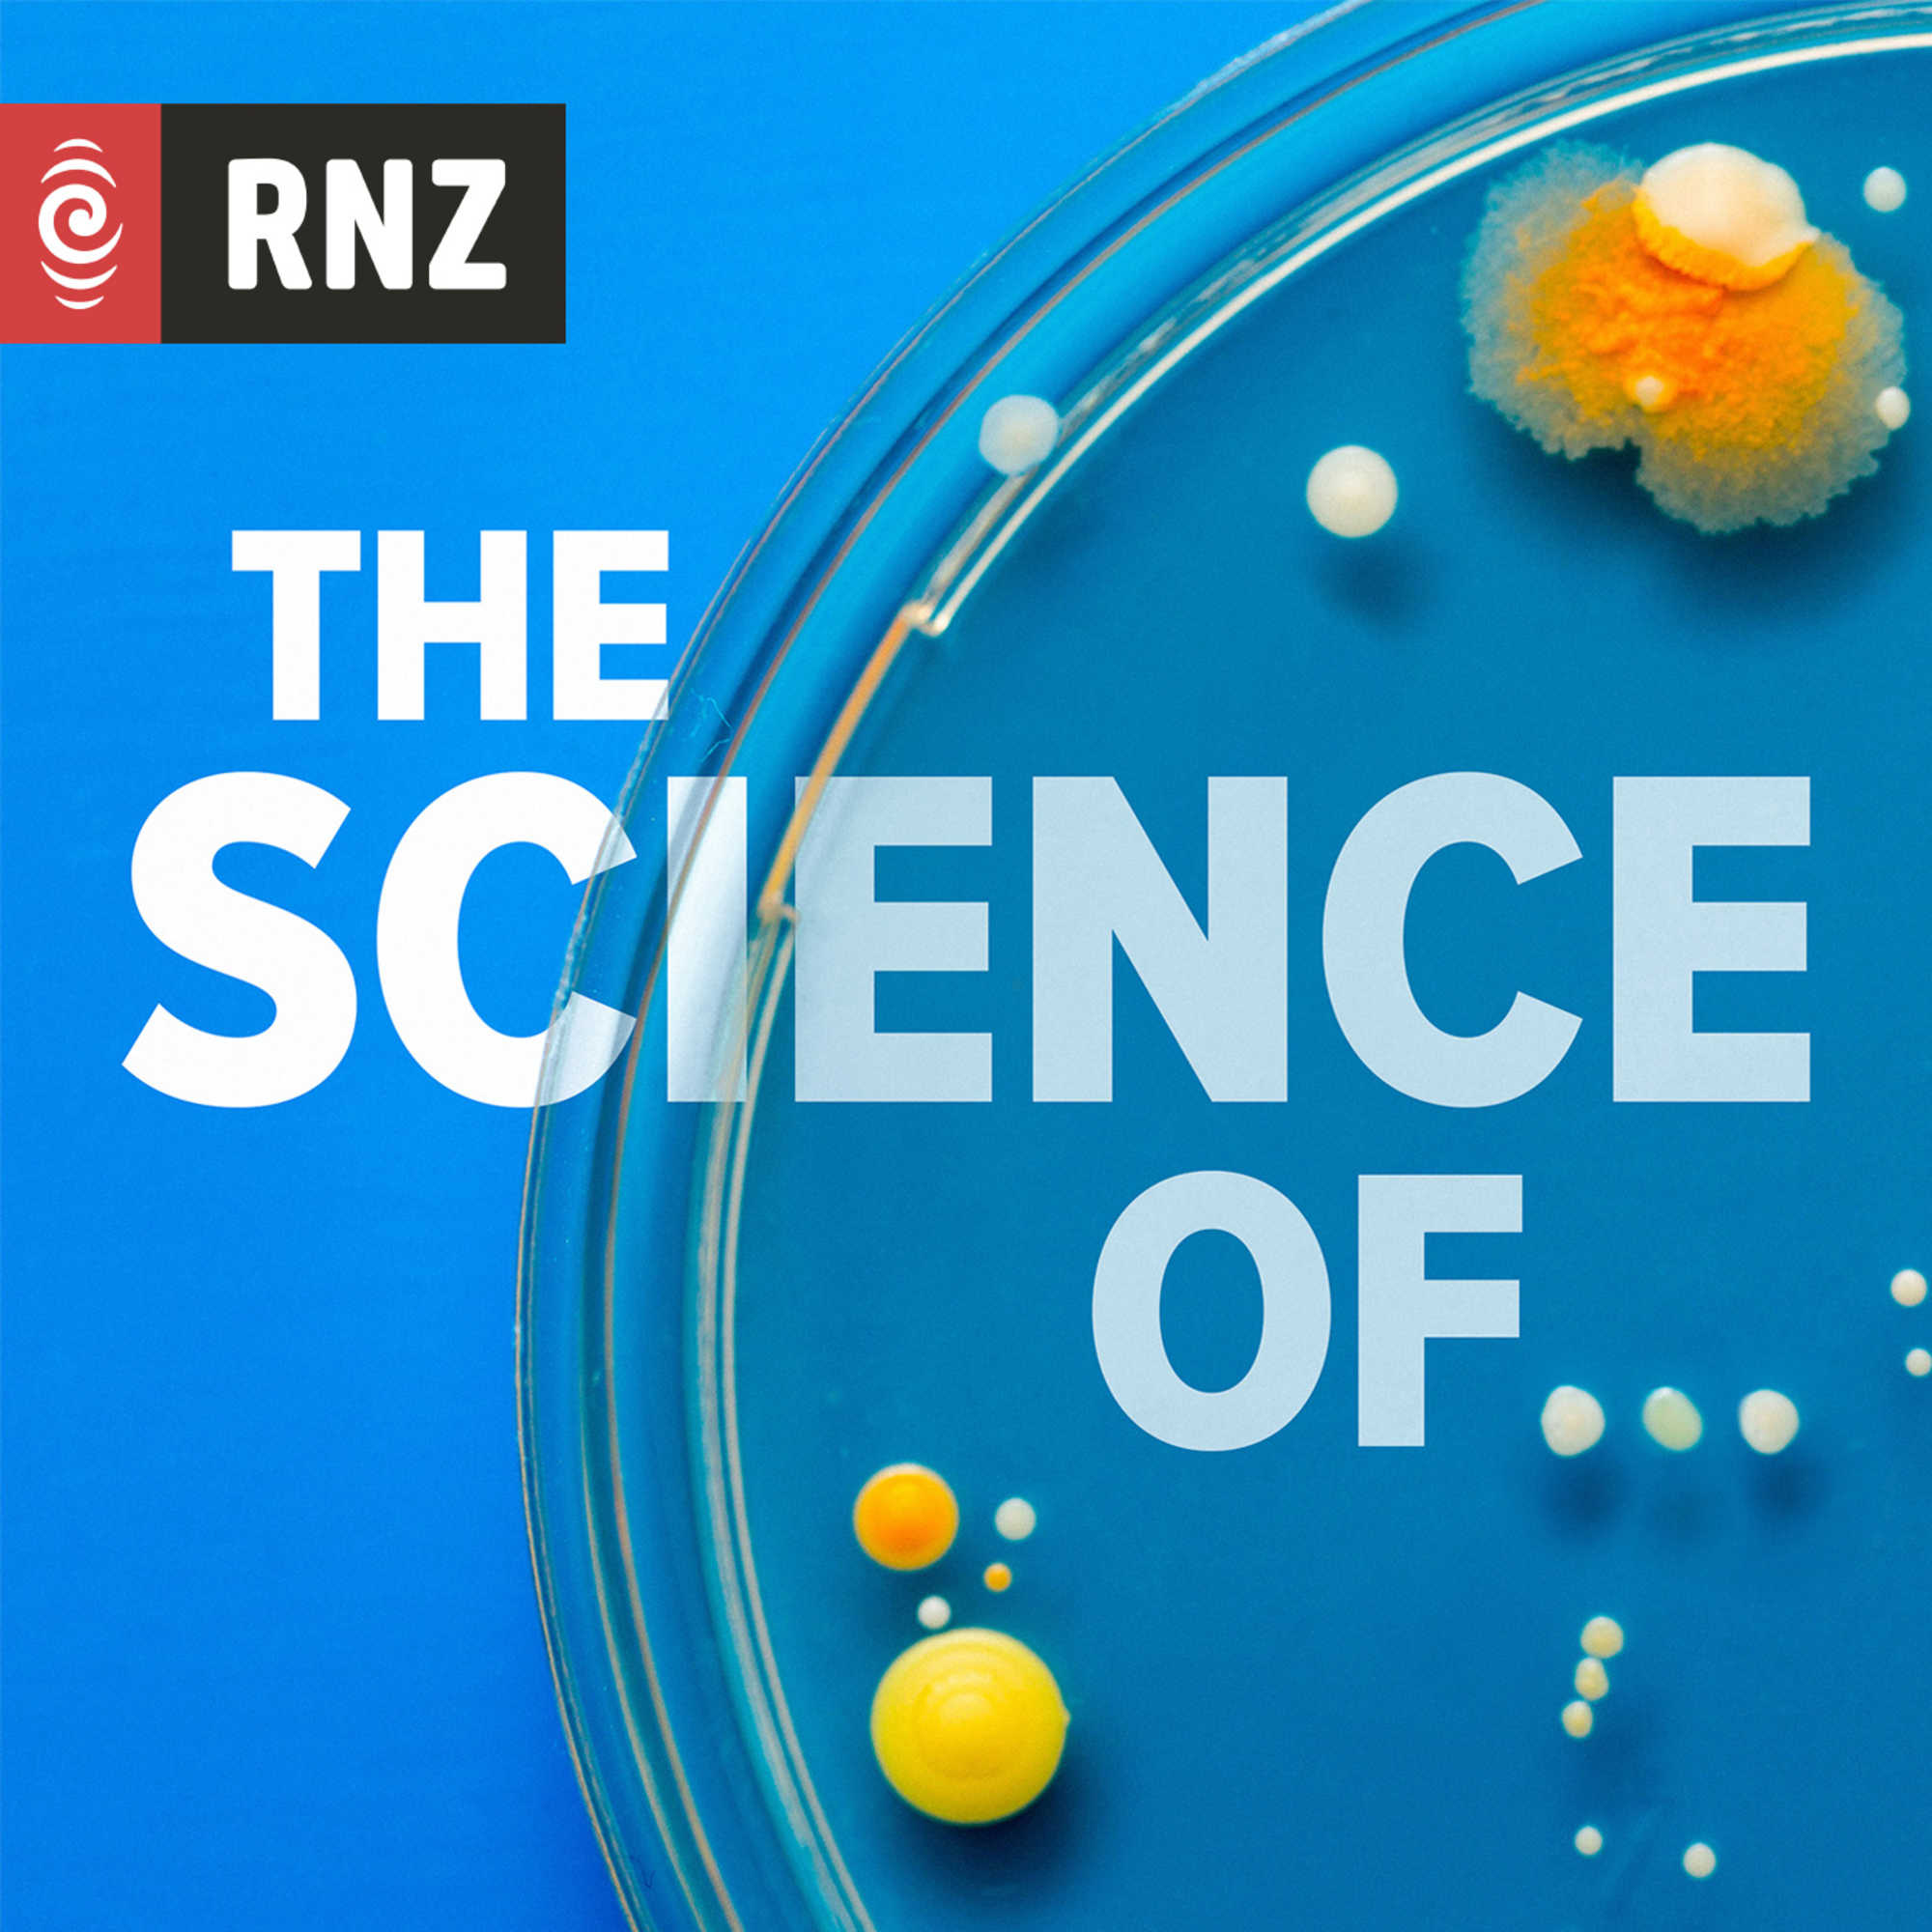 The Science Of…